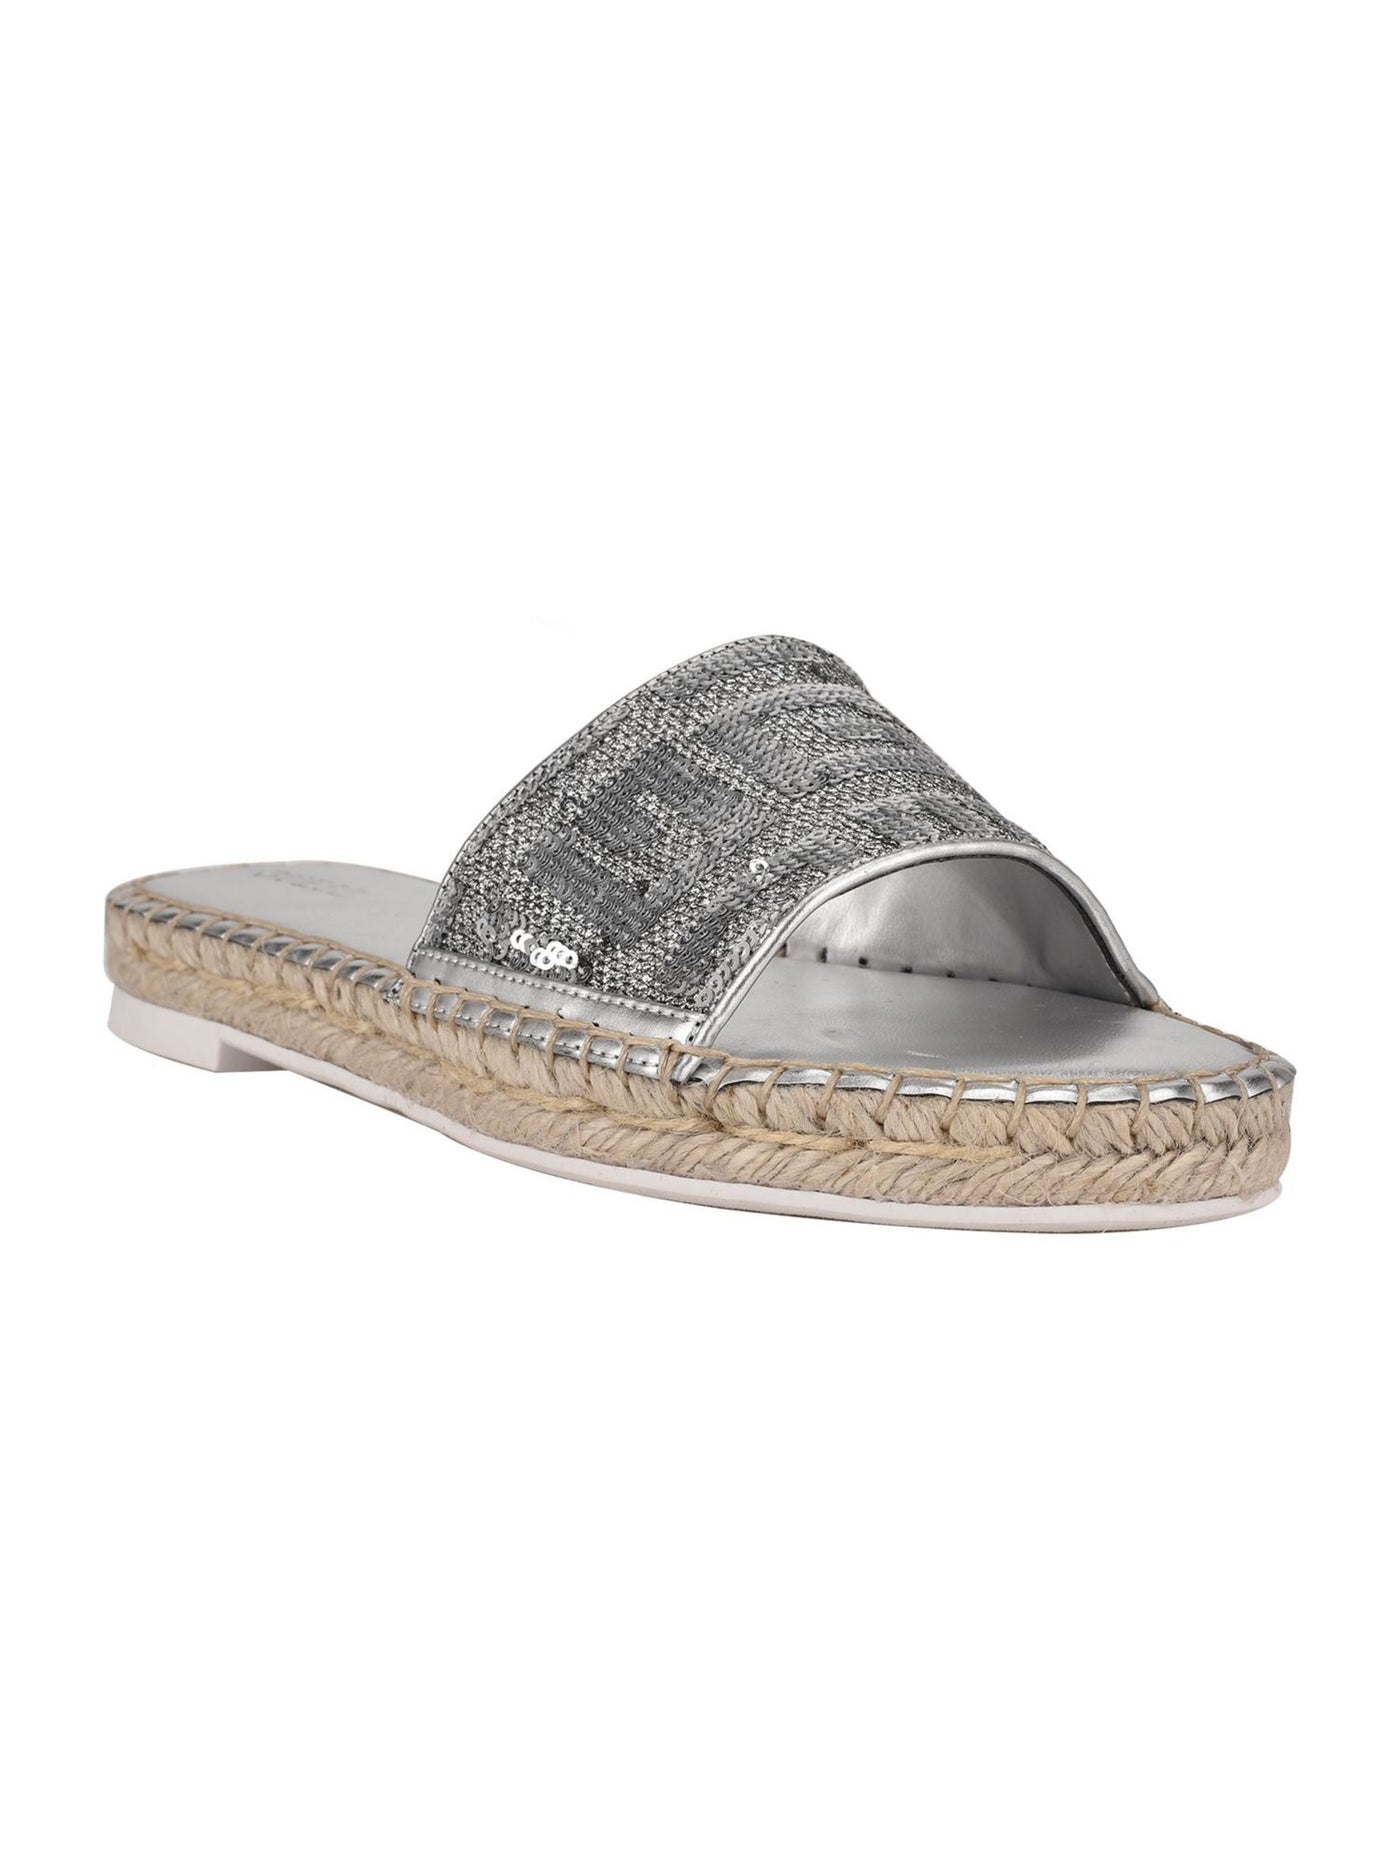 GUESS Womens Silver Jute Wrapped Sequined Comfort Guidany Round Toe Platform Slide Sandals Shoes 6.5 M